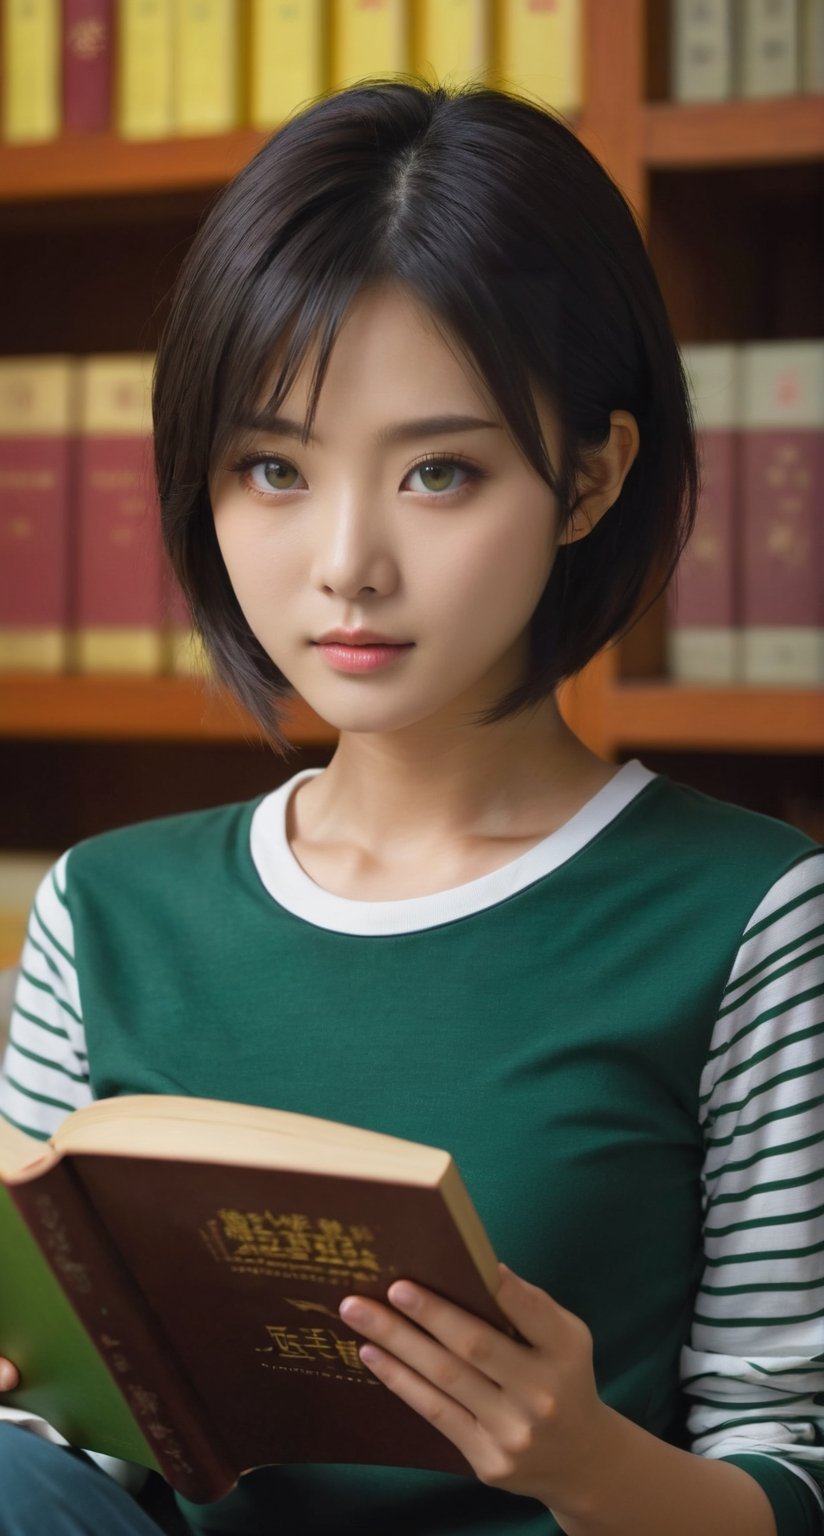 ((Top quality)), ((Masterpiece)), chinese Girl with neat hair, ((Full body photo,)) Green horizontal striped T-shirt, Beautiful eyes, (Brown eyes), Short black hair, Complex details, Very detailed eyes, Small mouth, medium chest, movie image, soft lighting, perfect face, provocative posture, super charm, wearing a dark brown suit, sitting on a chair in the library reading a book,